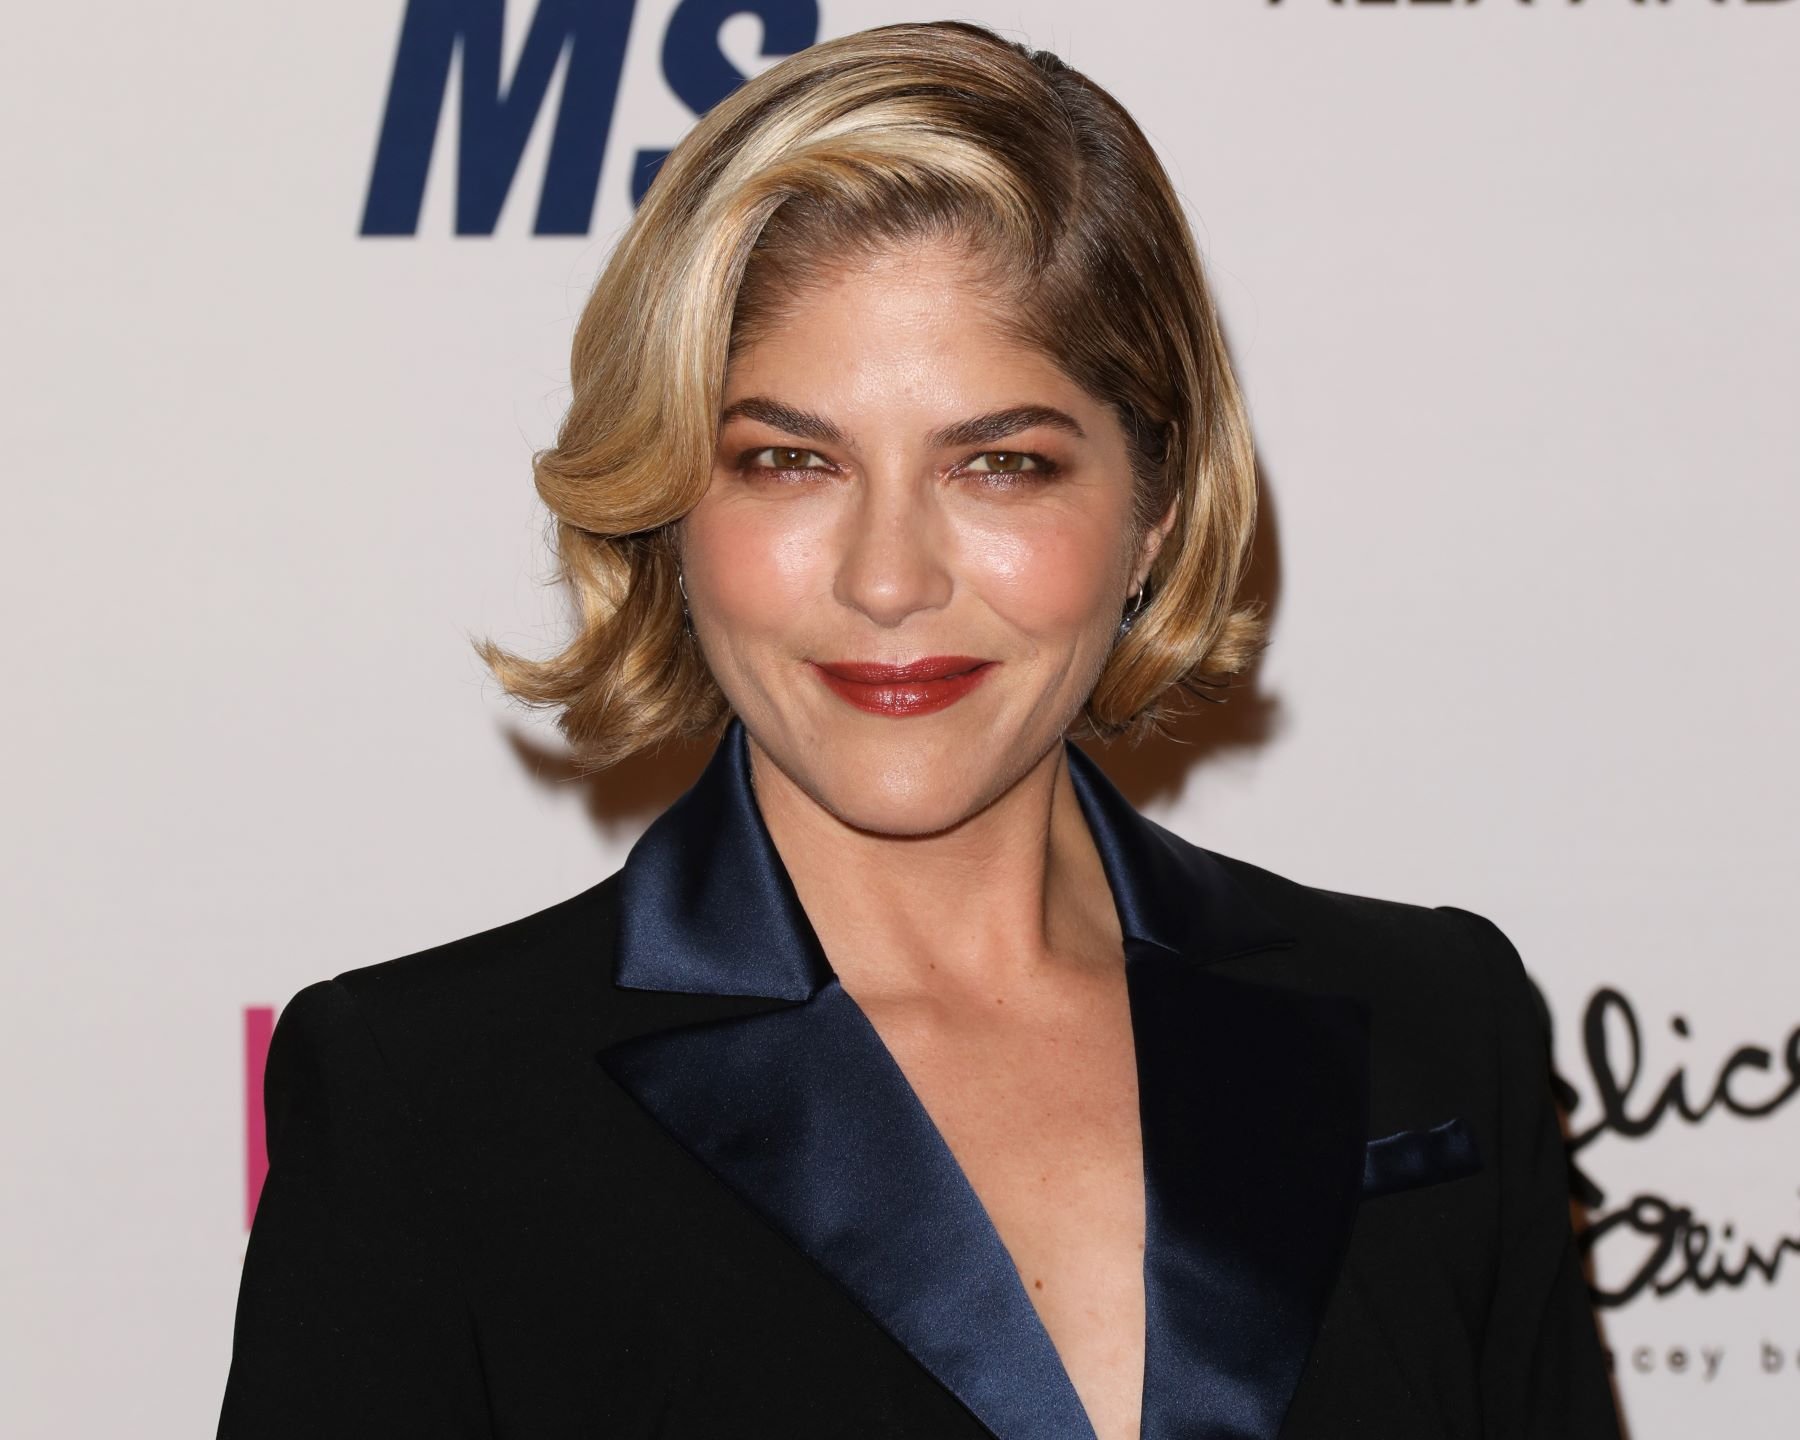 Selma Blair Partnered With an Accessible Beauty Brand After Injuring Herself With an Eyeliner Pencil